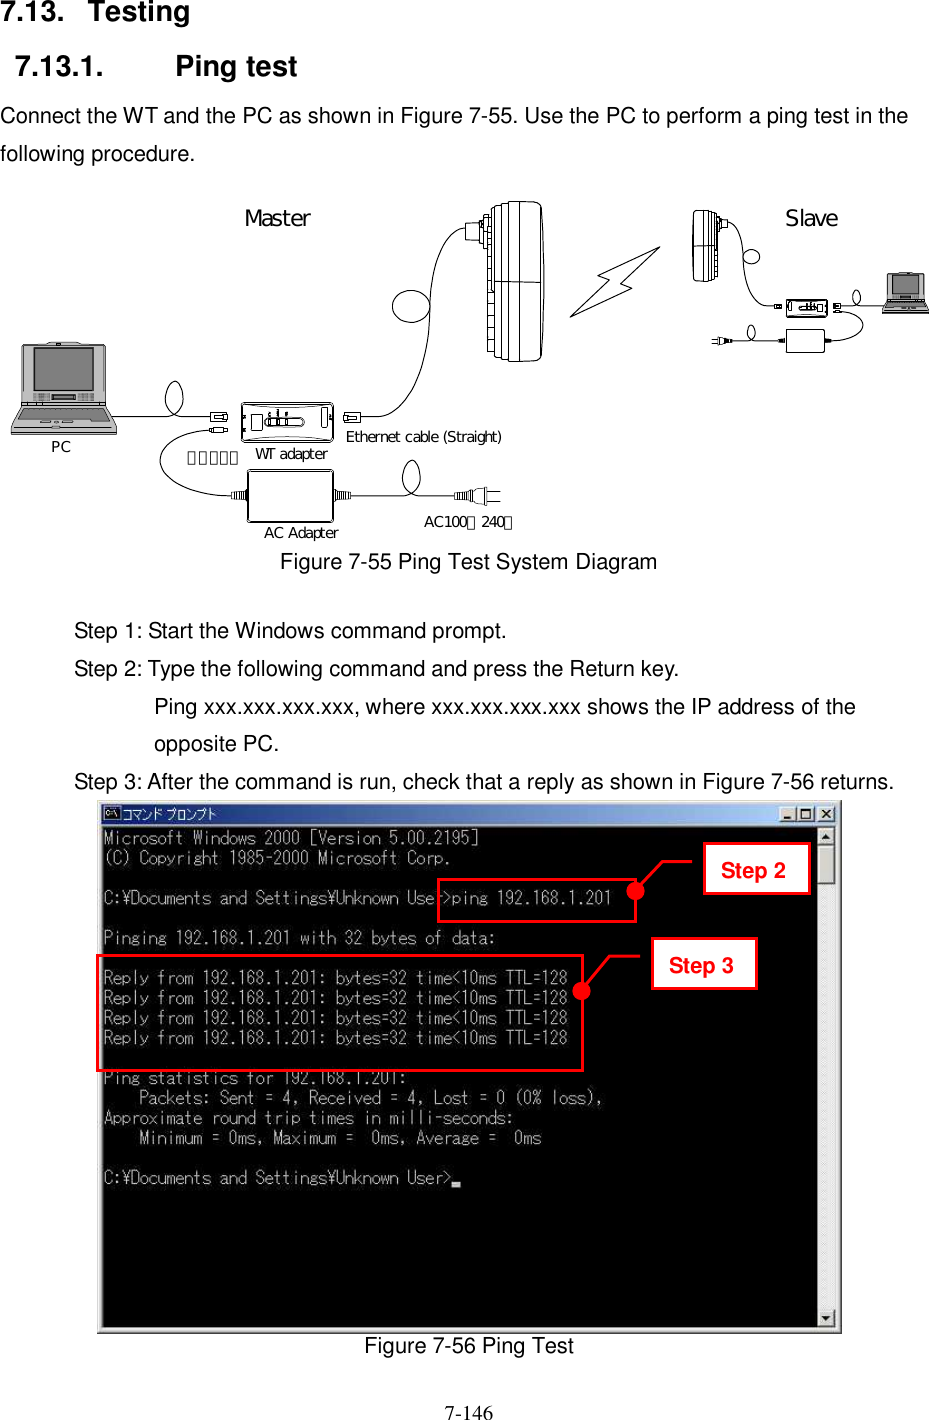   7-146   7.13.  Testing 7.13.1.  Ping test Connect the WT and the PC as shown in Figure 7-55. Use the PC to perform a ping test in the following procedure.  WT adapterAC Adapter AC100∼240ＶＤＣ２４ＶPC Ethernet cable (Straight)Master Slave Figure 7-55 Ping Test System Diagram  Step 1: Start the Windows command prompt. Step 2: Type the following command and press the Return key. Ping xxx.xxx.xxx.xxx, where xxx.xxx.xxx.xxx shows the IP address of the opposite PC. Step 3: After the command is run, check that a reply as shown in Figure 7-56 returns.  Figure 7-56 Ping Test Step 2 Step 3 